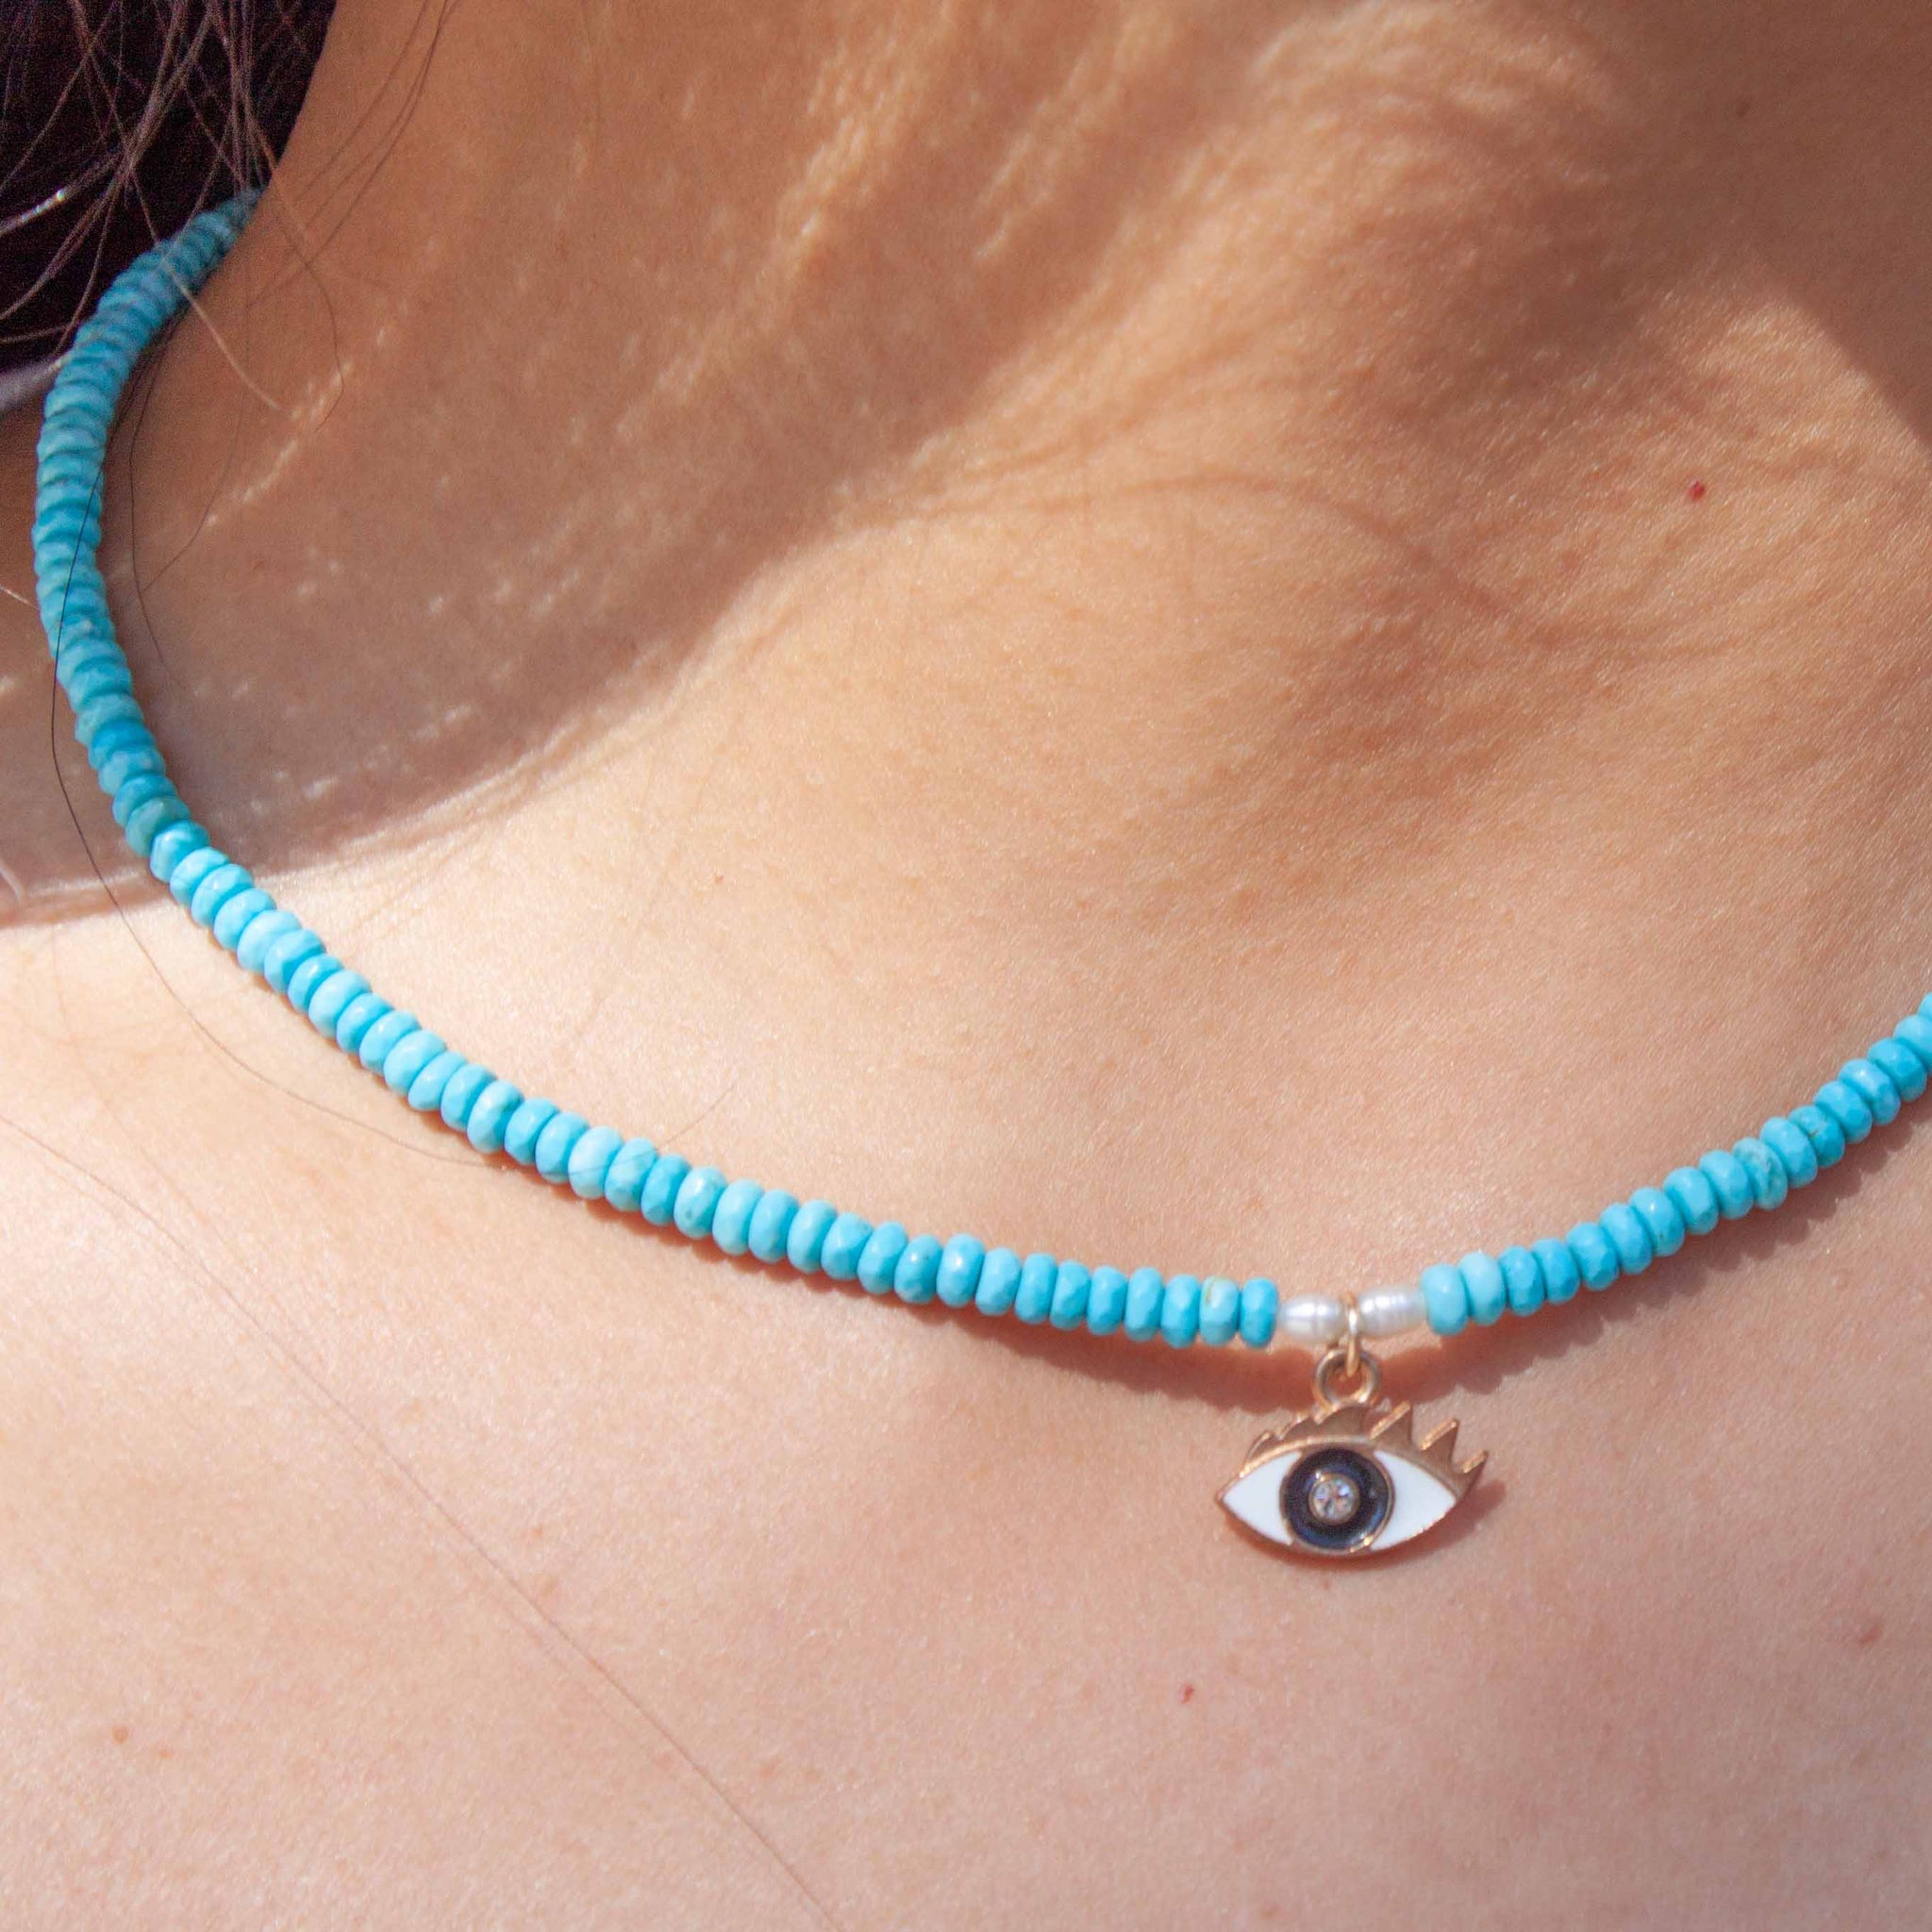 A universal symbol of protection, the evil eye talisman dates back to ancient Greece. This charm is paired with bright turquoise beads and freshwater pearls. 16" necklace beaded with synthetic, faceted turquoise beads and freshwater pearls enamel evil eye pendant with sparkly iris. Made in Toronto by kp jewelry co.